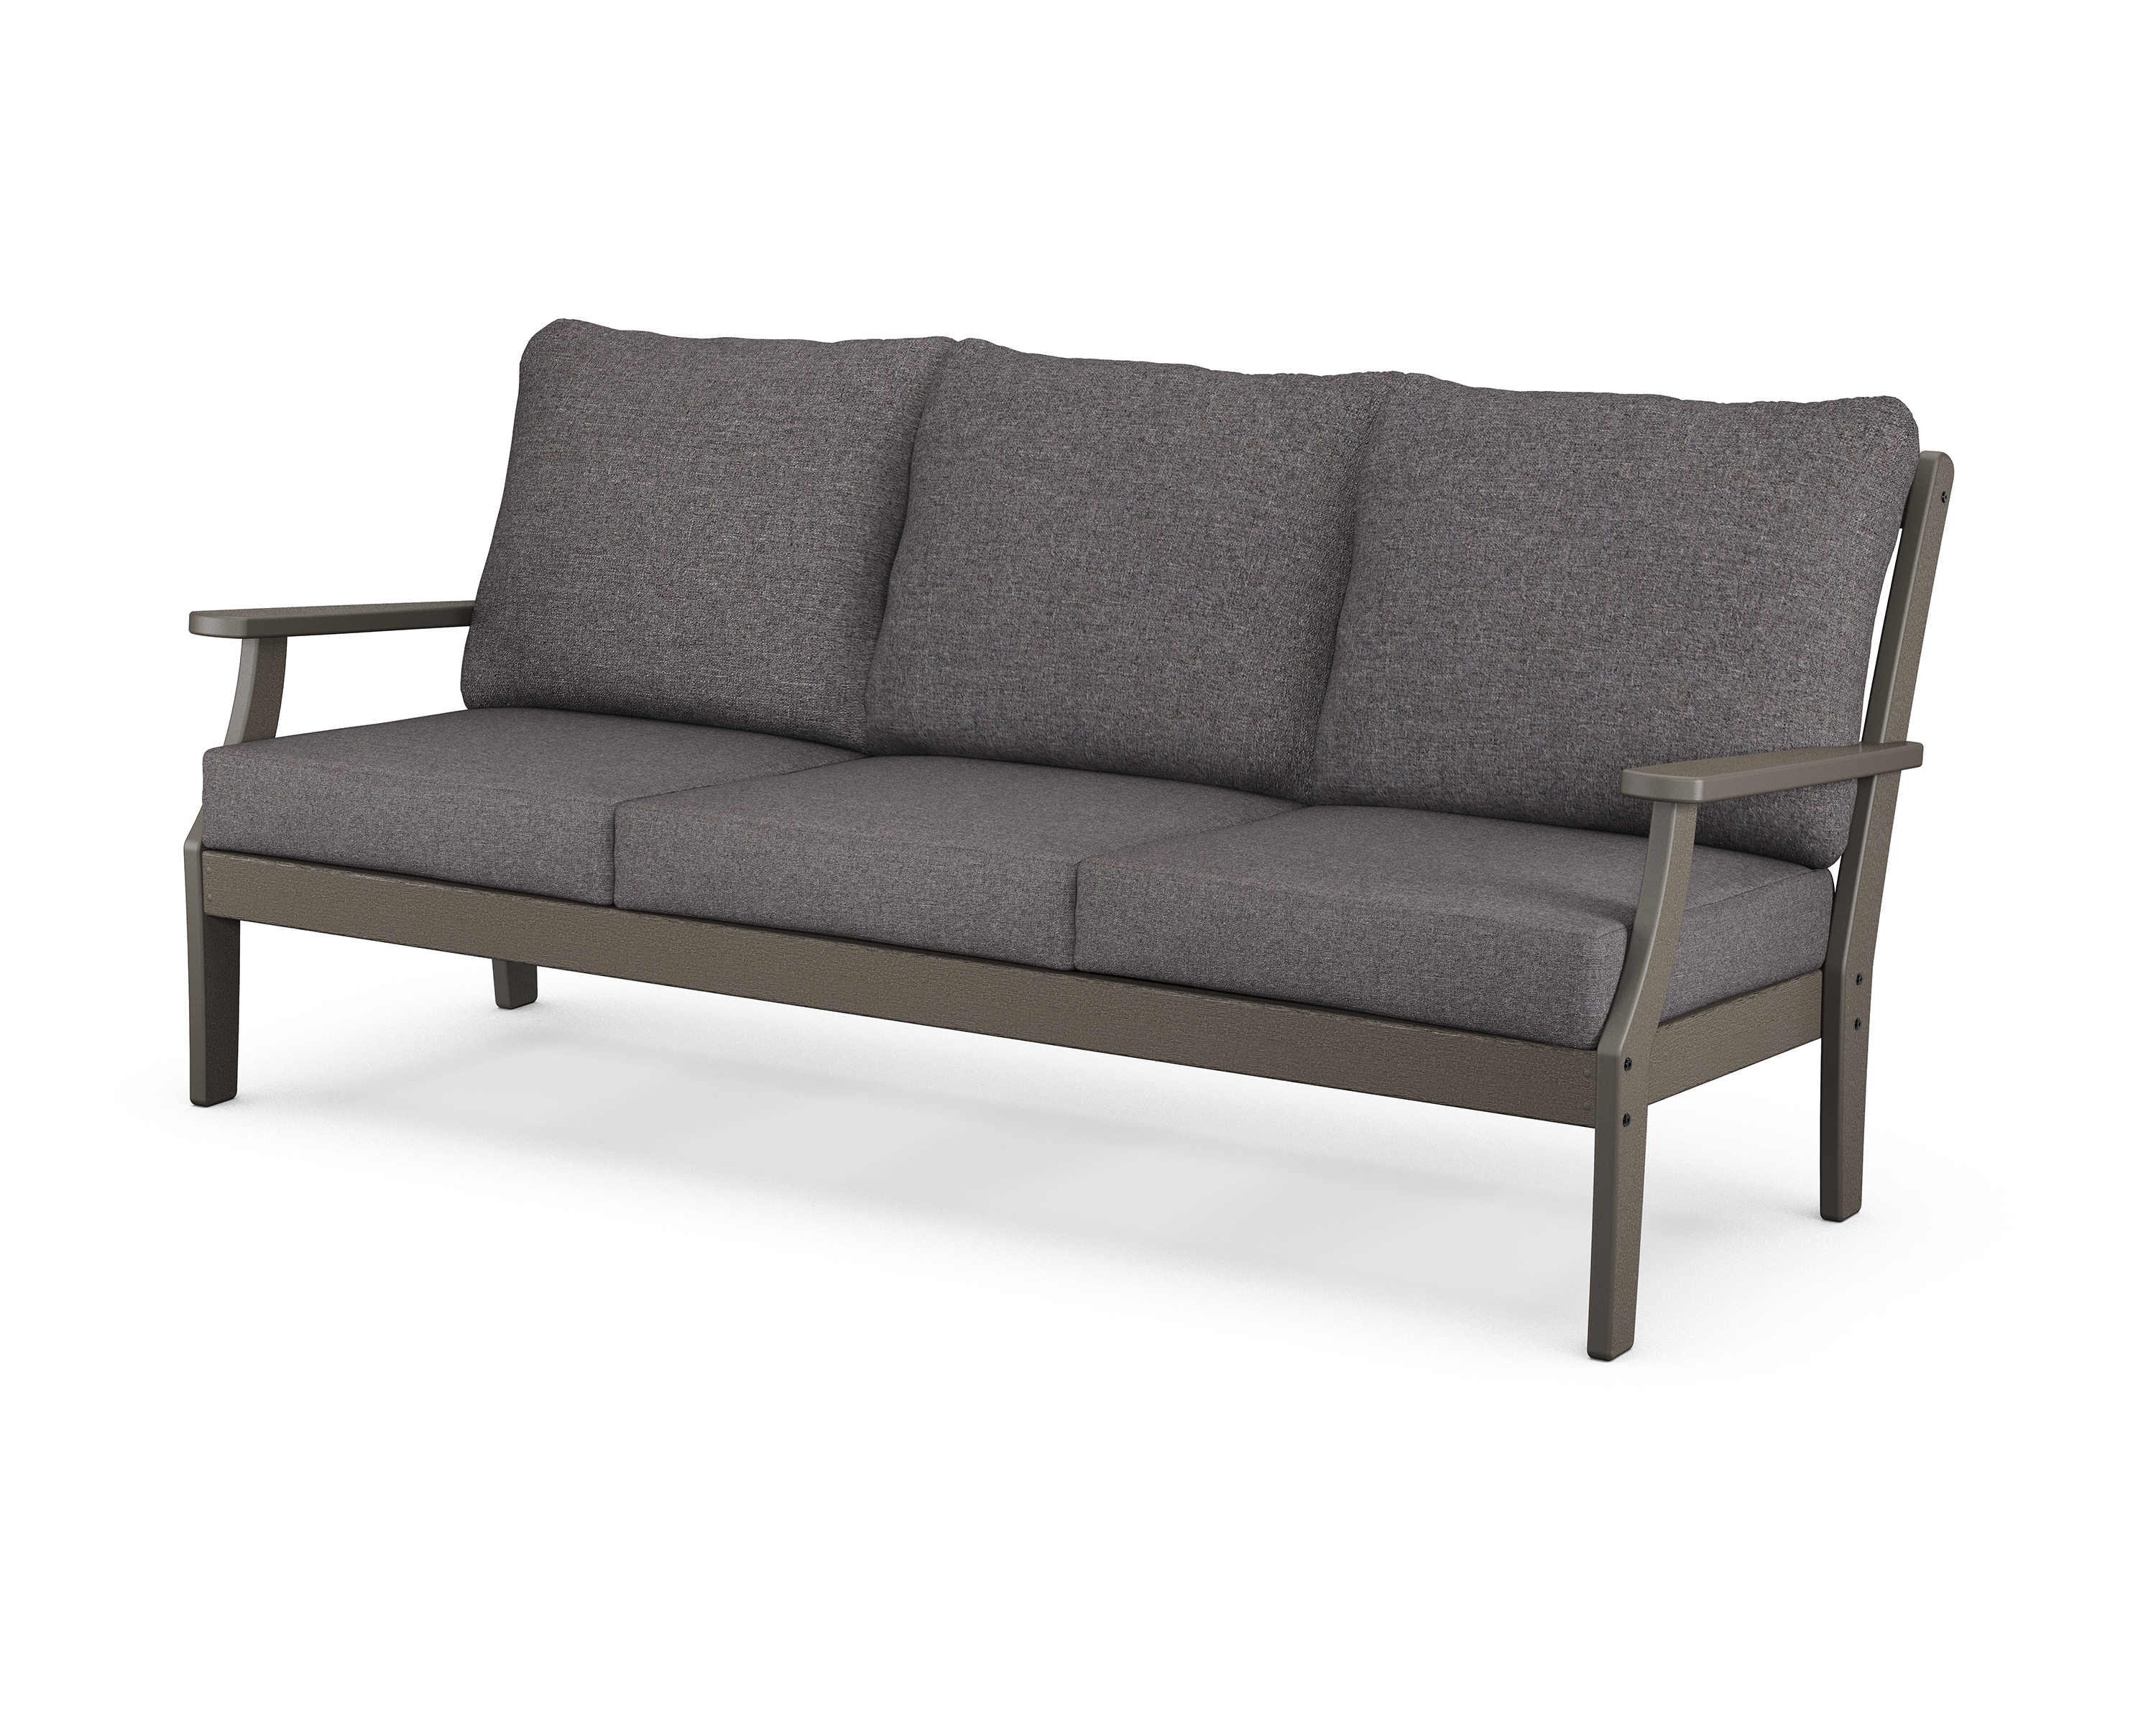 braxton deep seating sofa in vintage coffee / ash charcoal product image